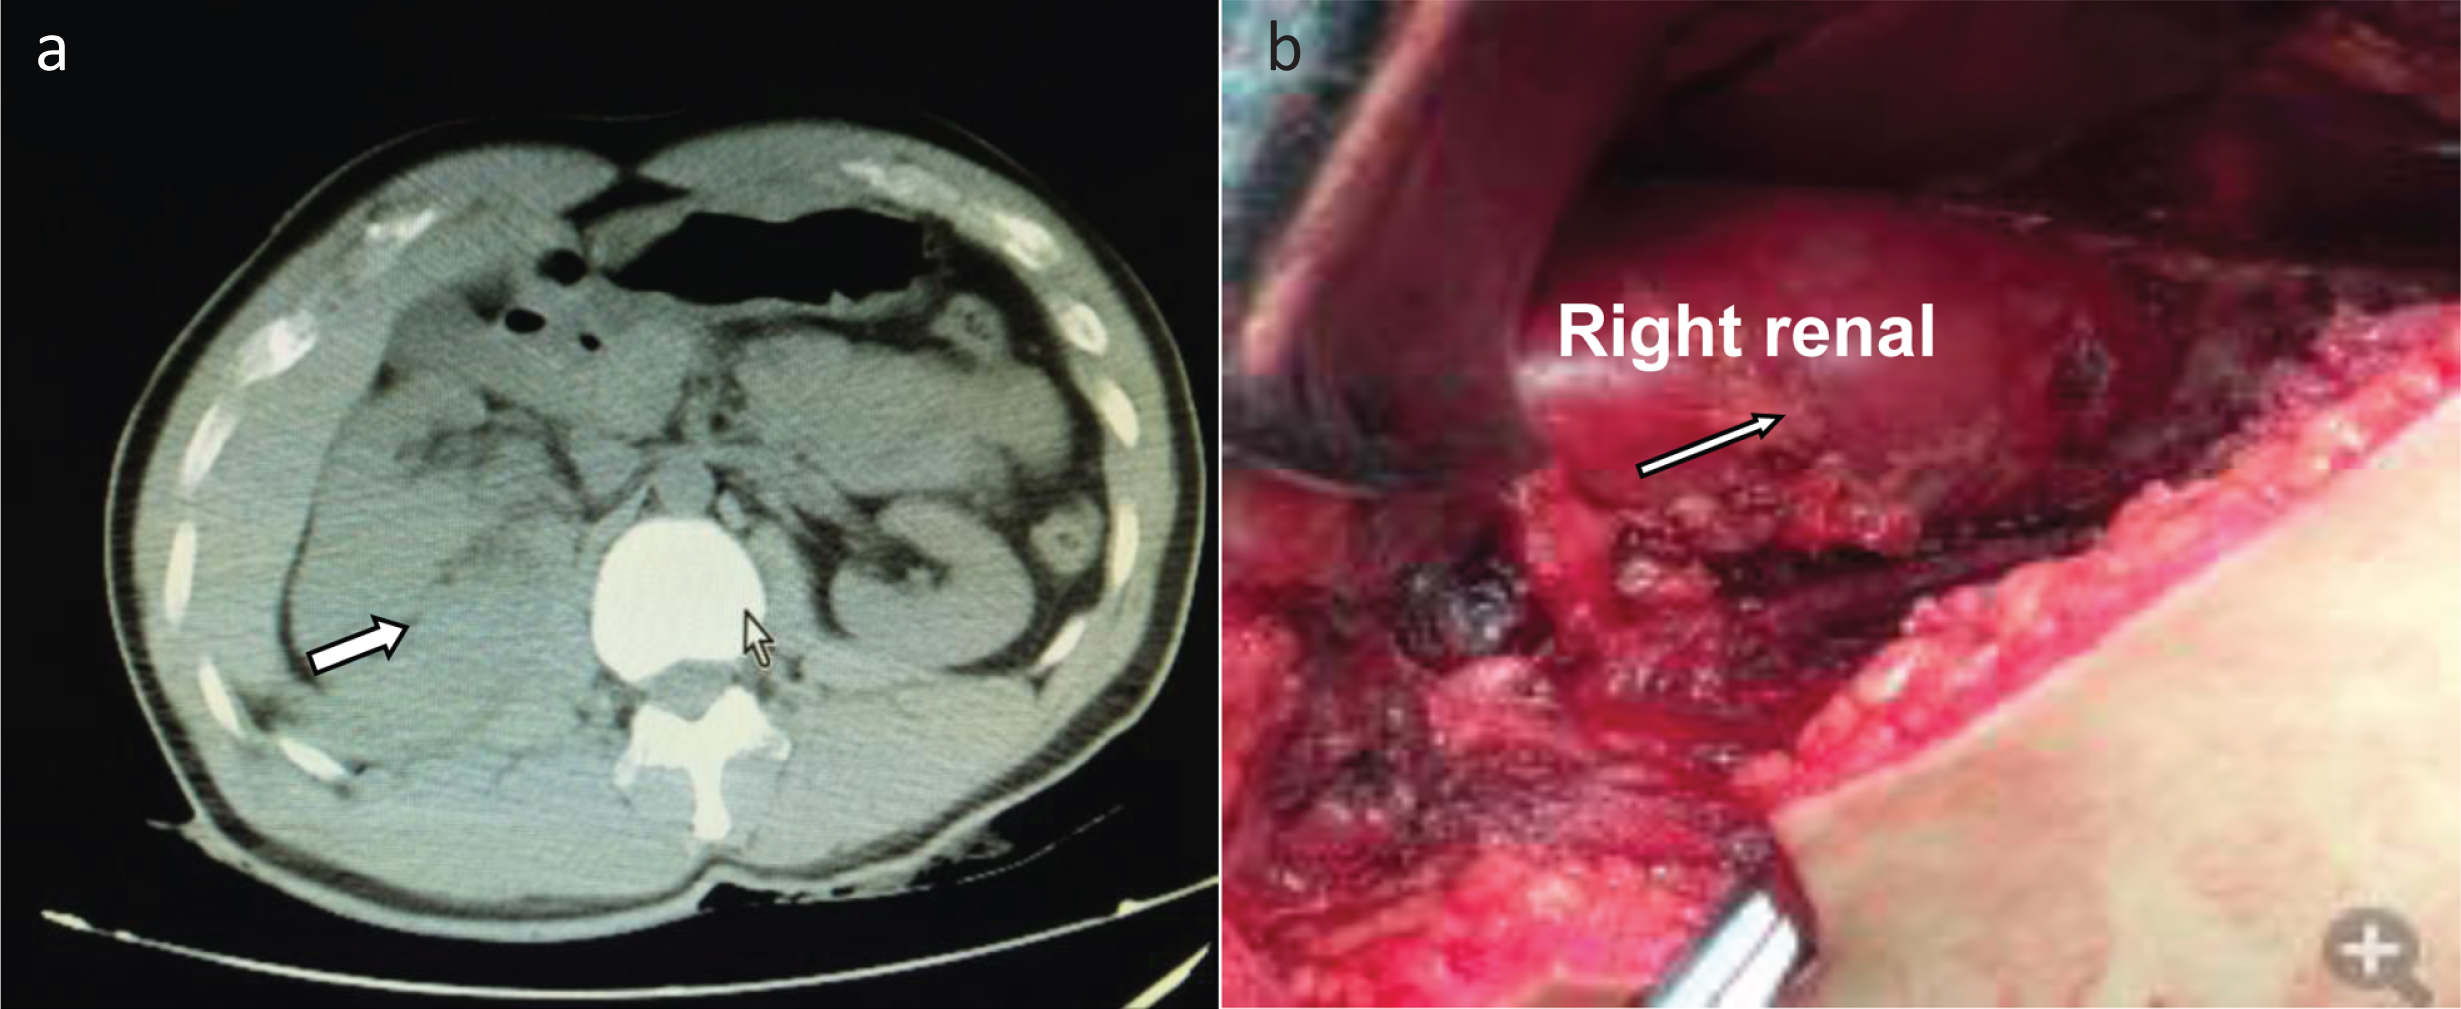 (a) Right kidney enlarges due to injury. (b) Surgical exploration showed a complete right kidney (Lunbarartery hemorrhage).